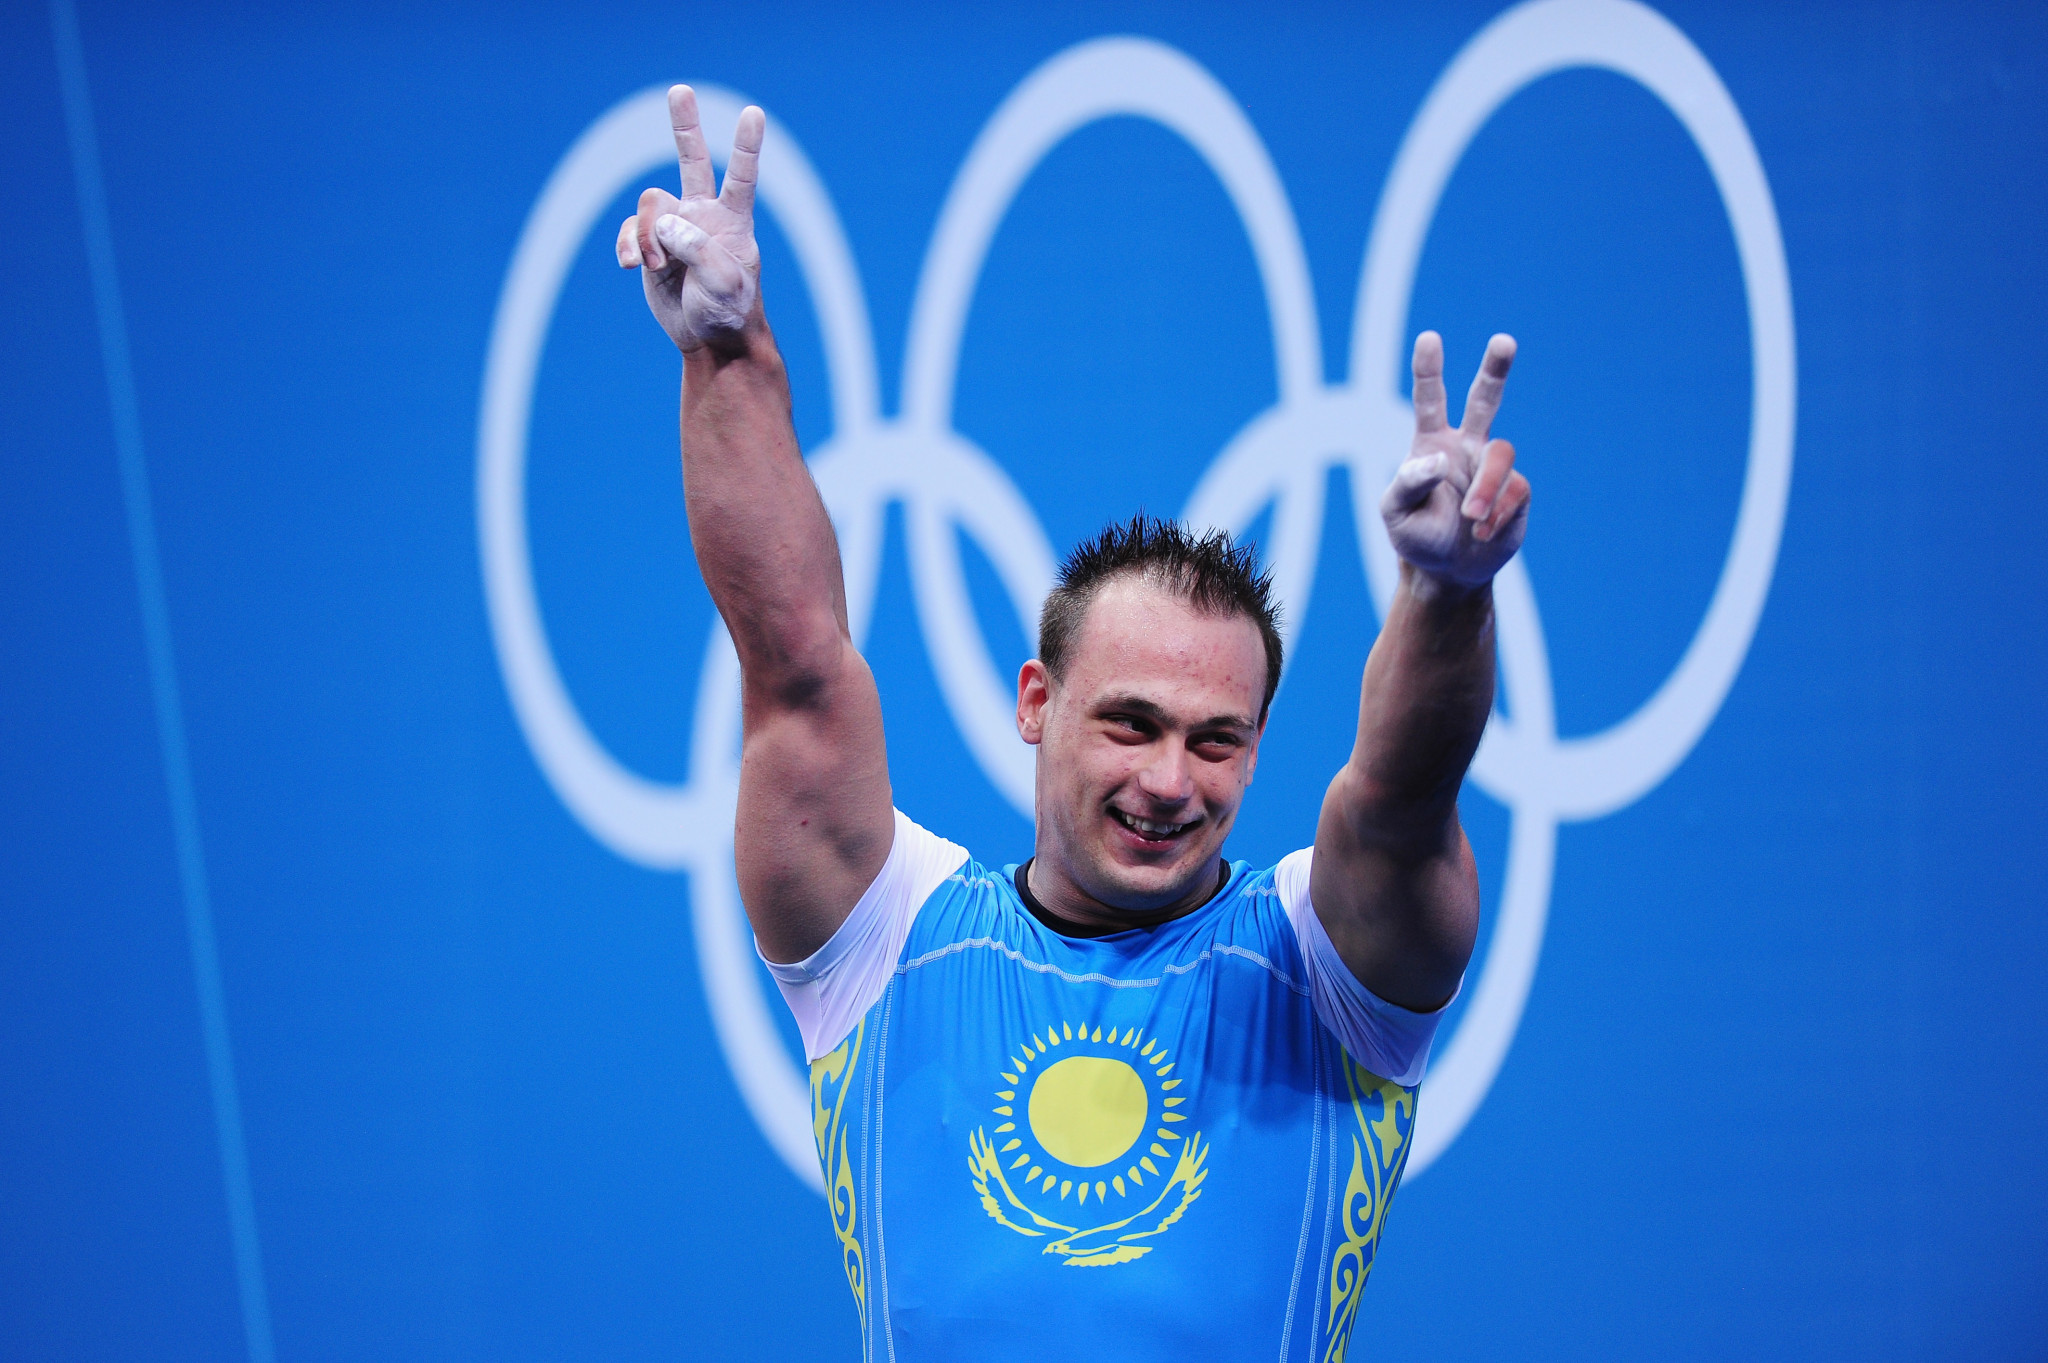 Ilya Ilyin was strongly supported in his campaign to become President of the Kazakhstan Weightlifting Federation but withdrew after talks with the Sports Minister ©Getty Images  